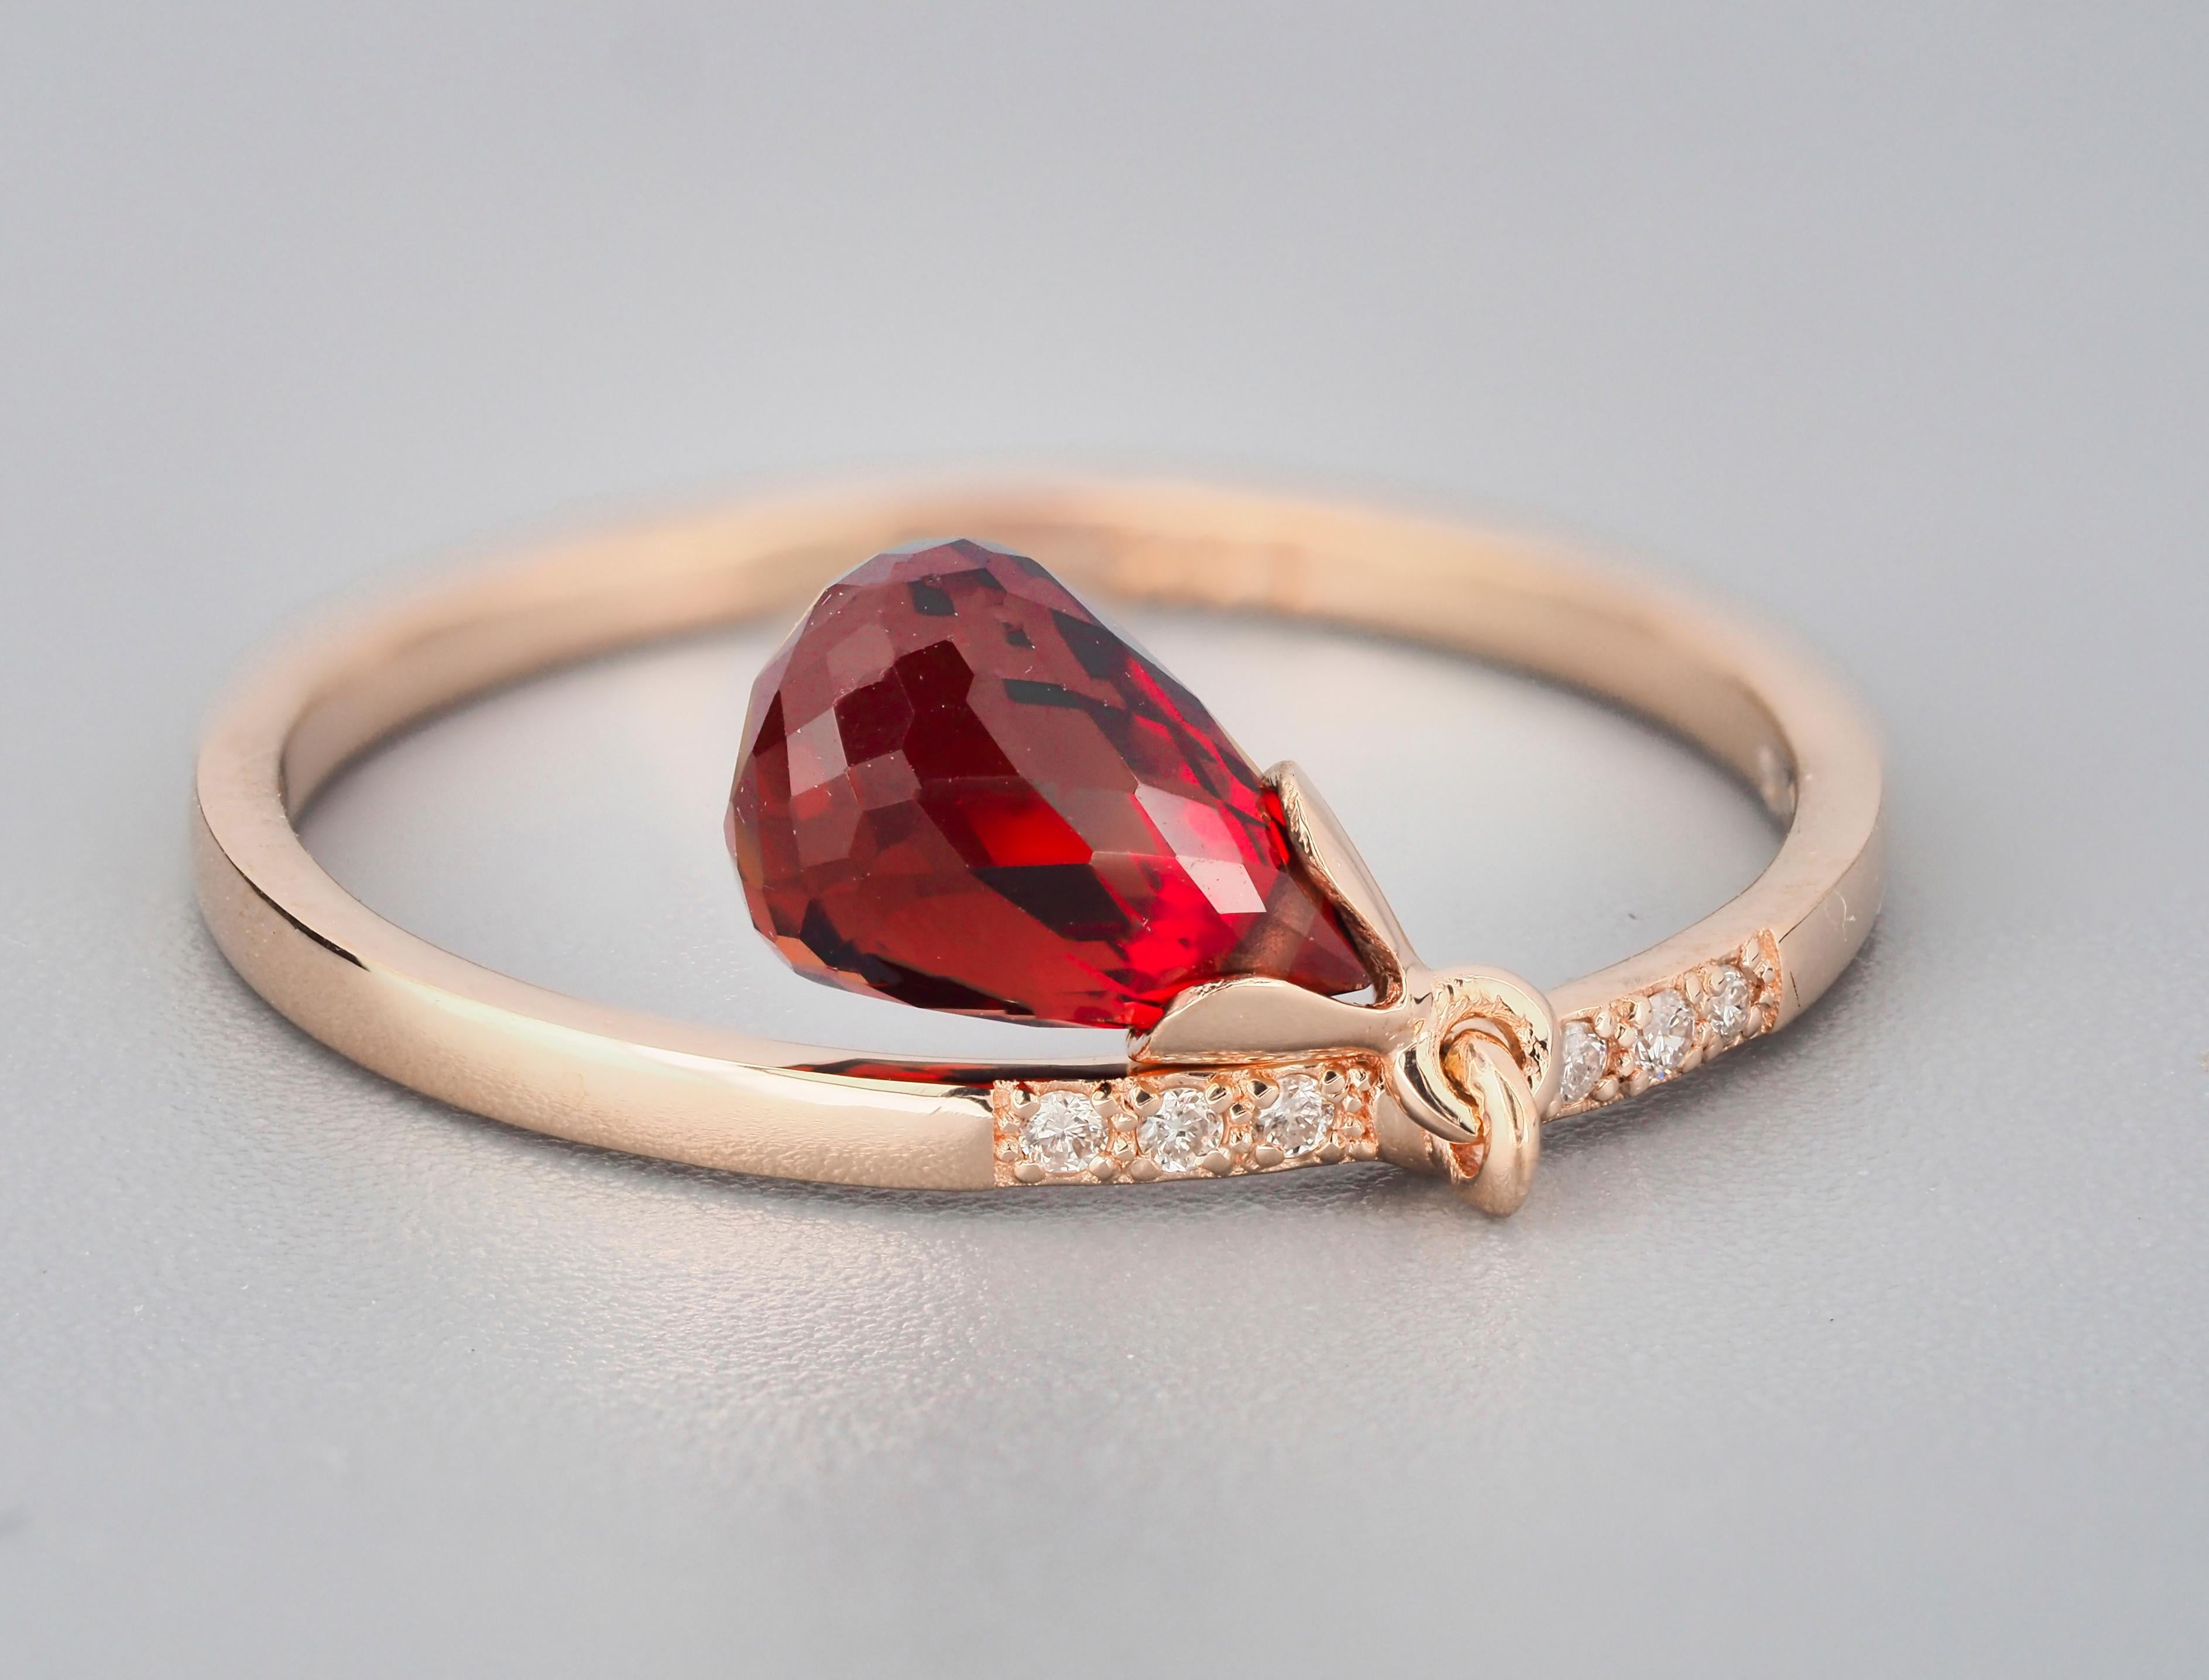 For Sale:  14k Gold Ring with Briolette Cut Garnet and Diamonds 2